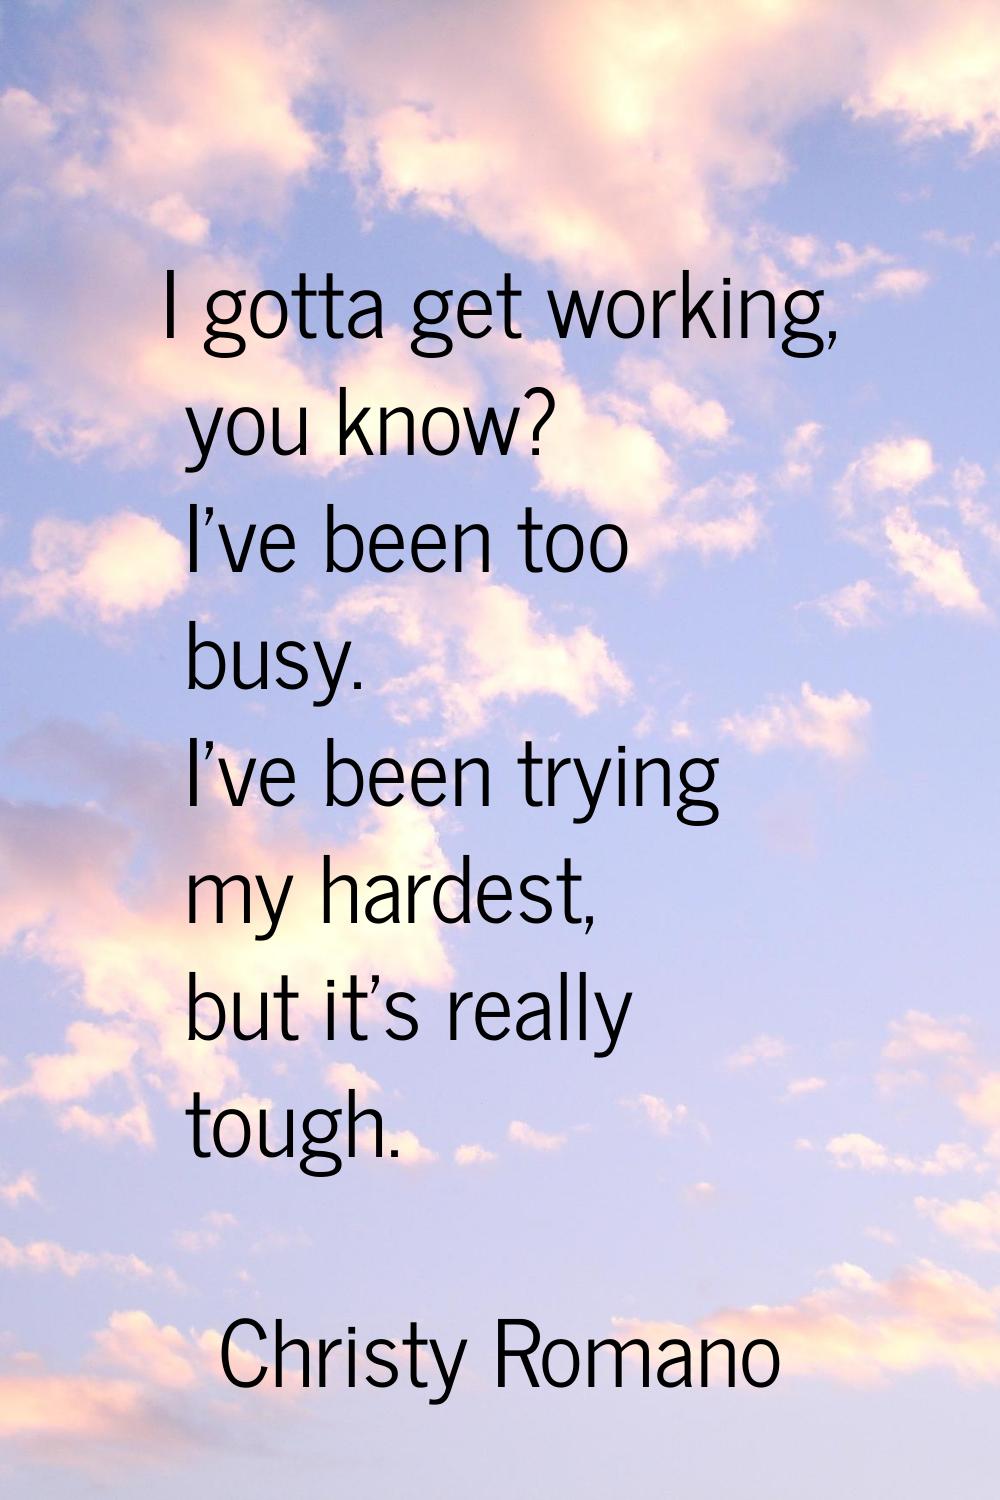 I gotta get working, you know? I've been too busy. I've been trying my hardest, but it's really tou